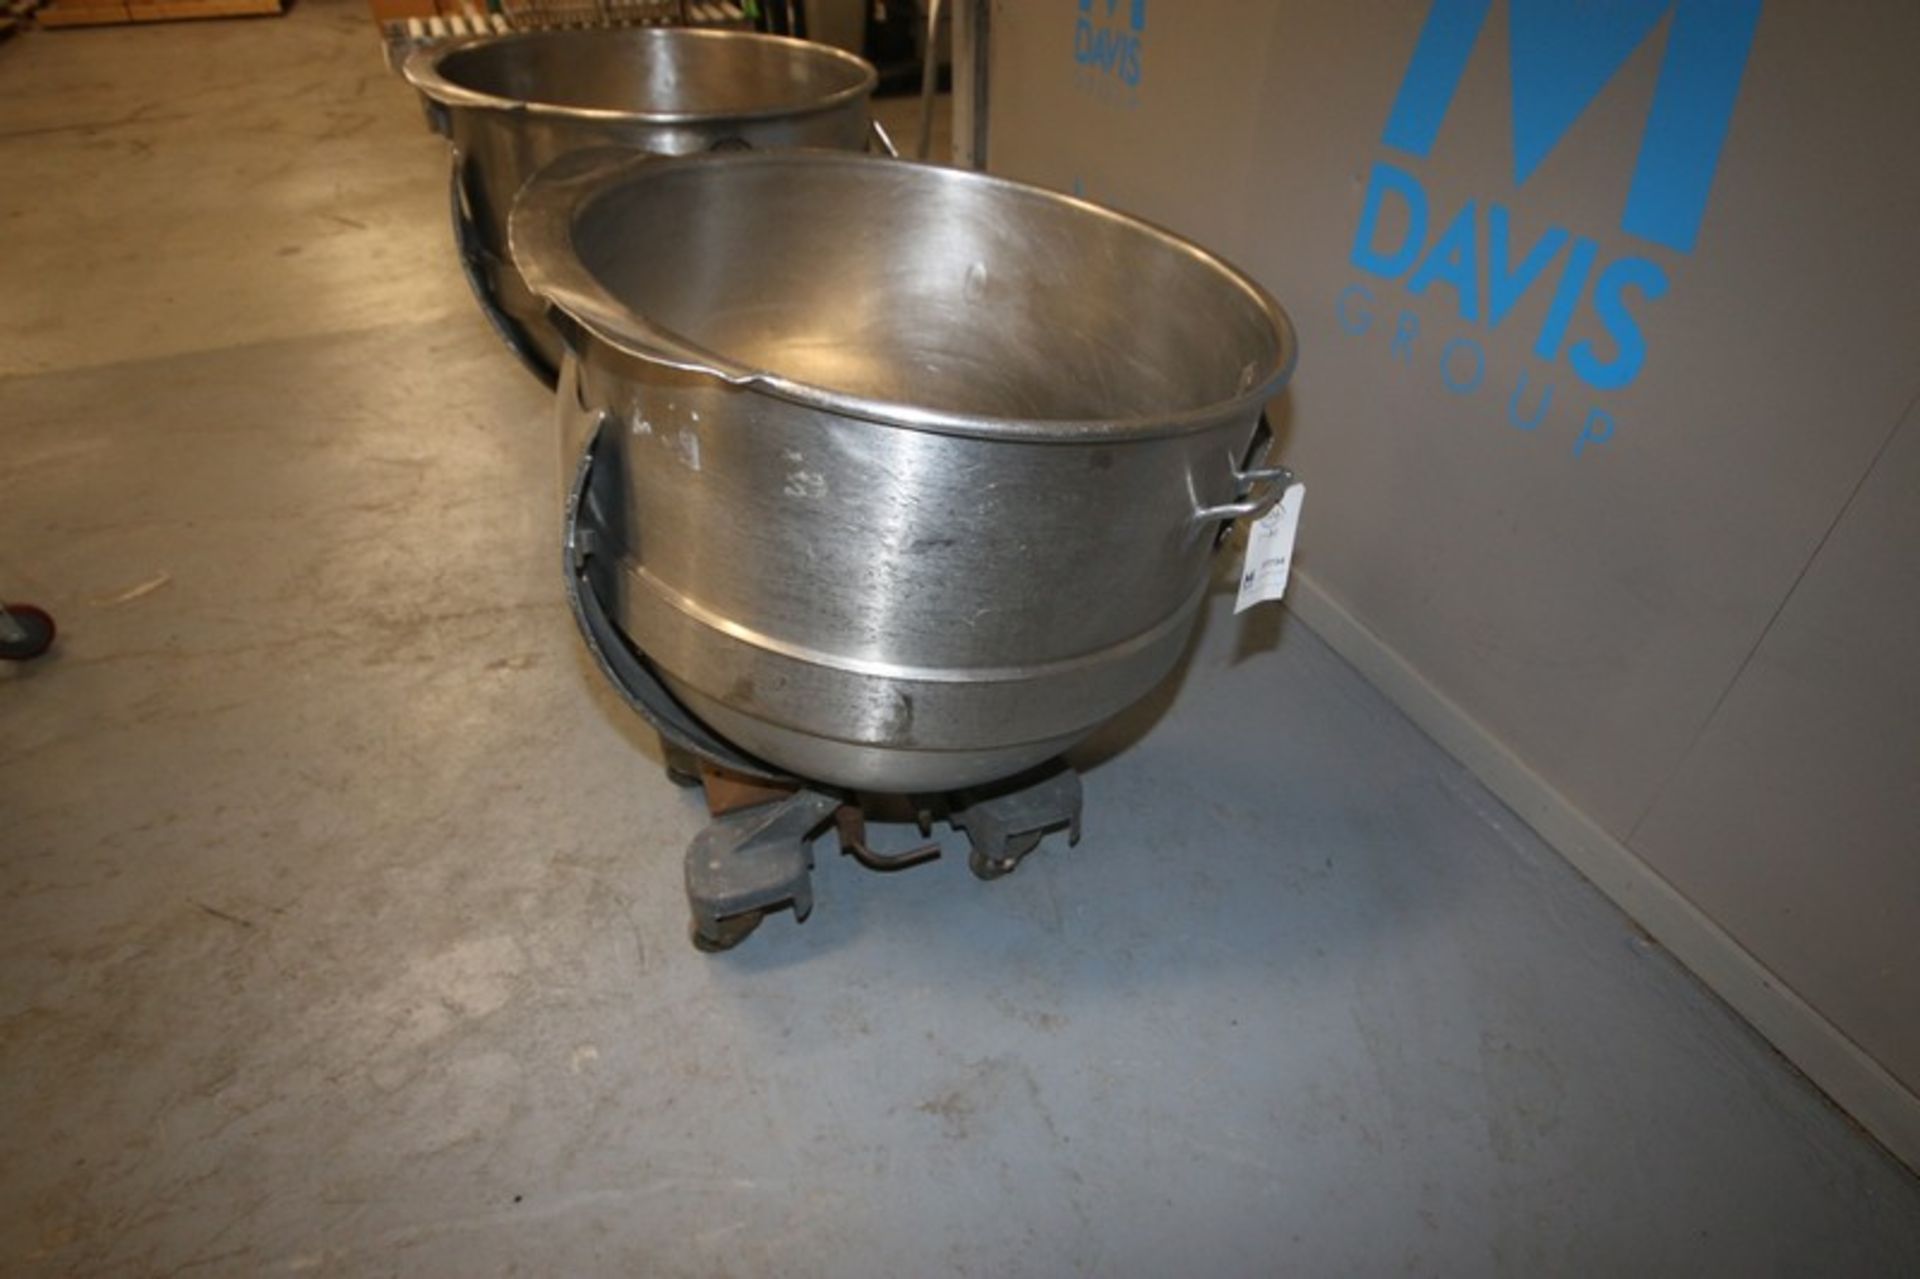 S/S Mixing Bowl, Internal Dims.:  Aprox. 32-1/2" Dia. x 26-1/2" Deep, Mounted on Portable Cart ( - Image 5 of 7